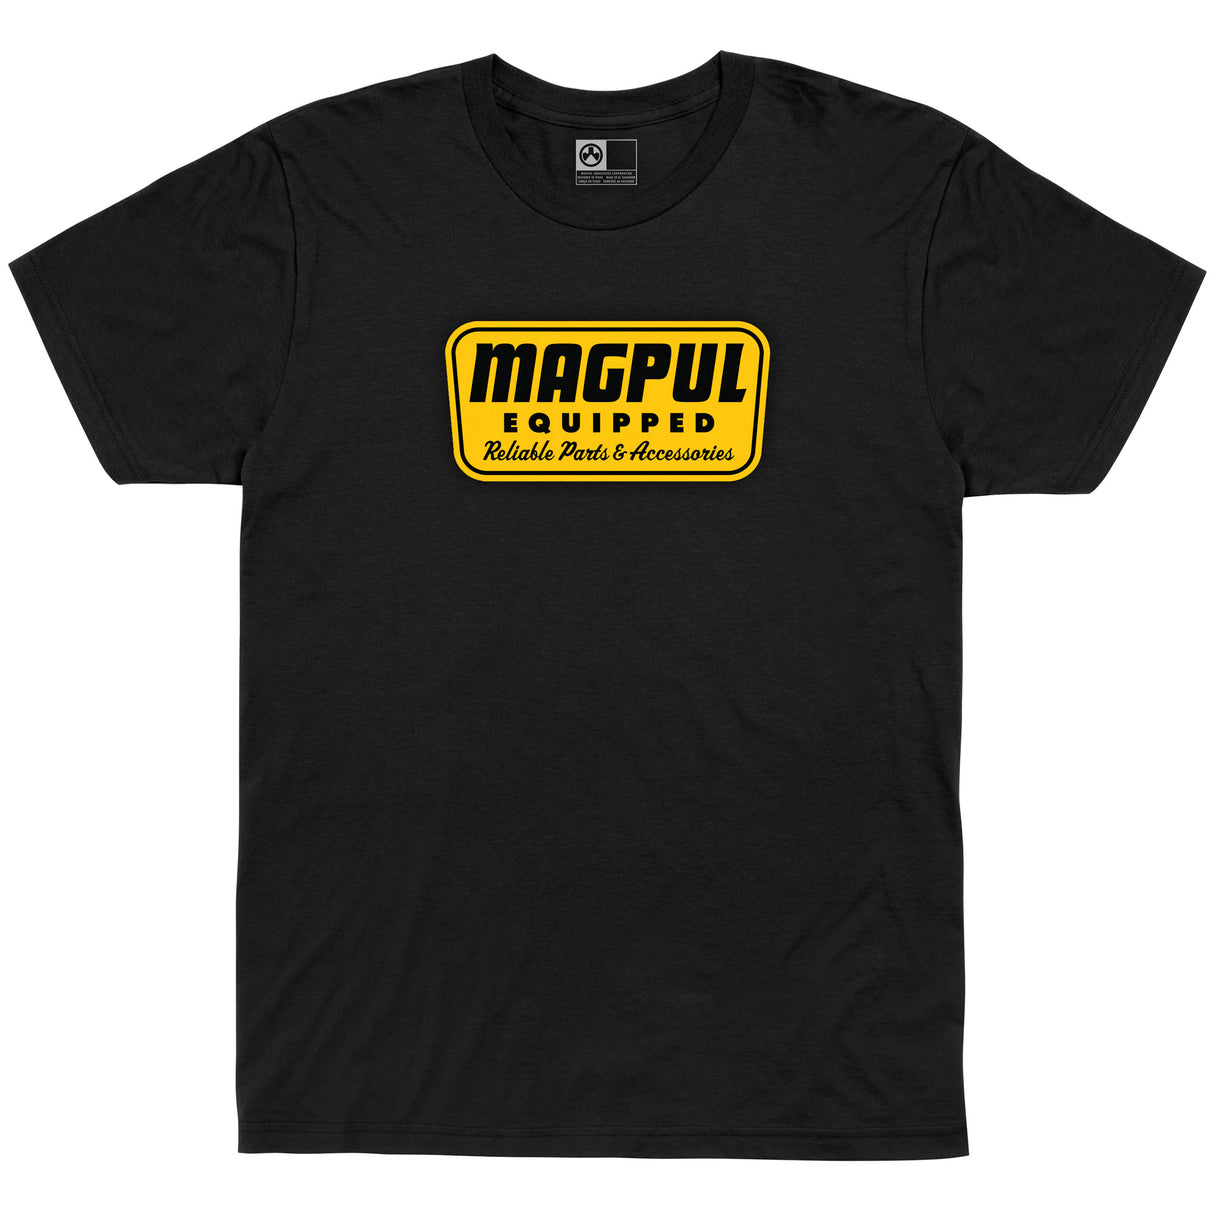 Magpul Equipped Blend T-Shirt Black, 2X-Large